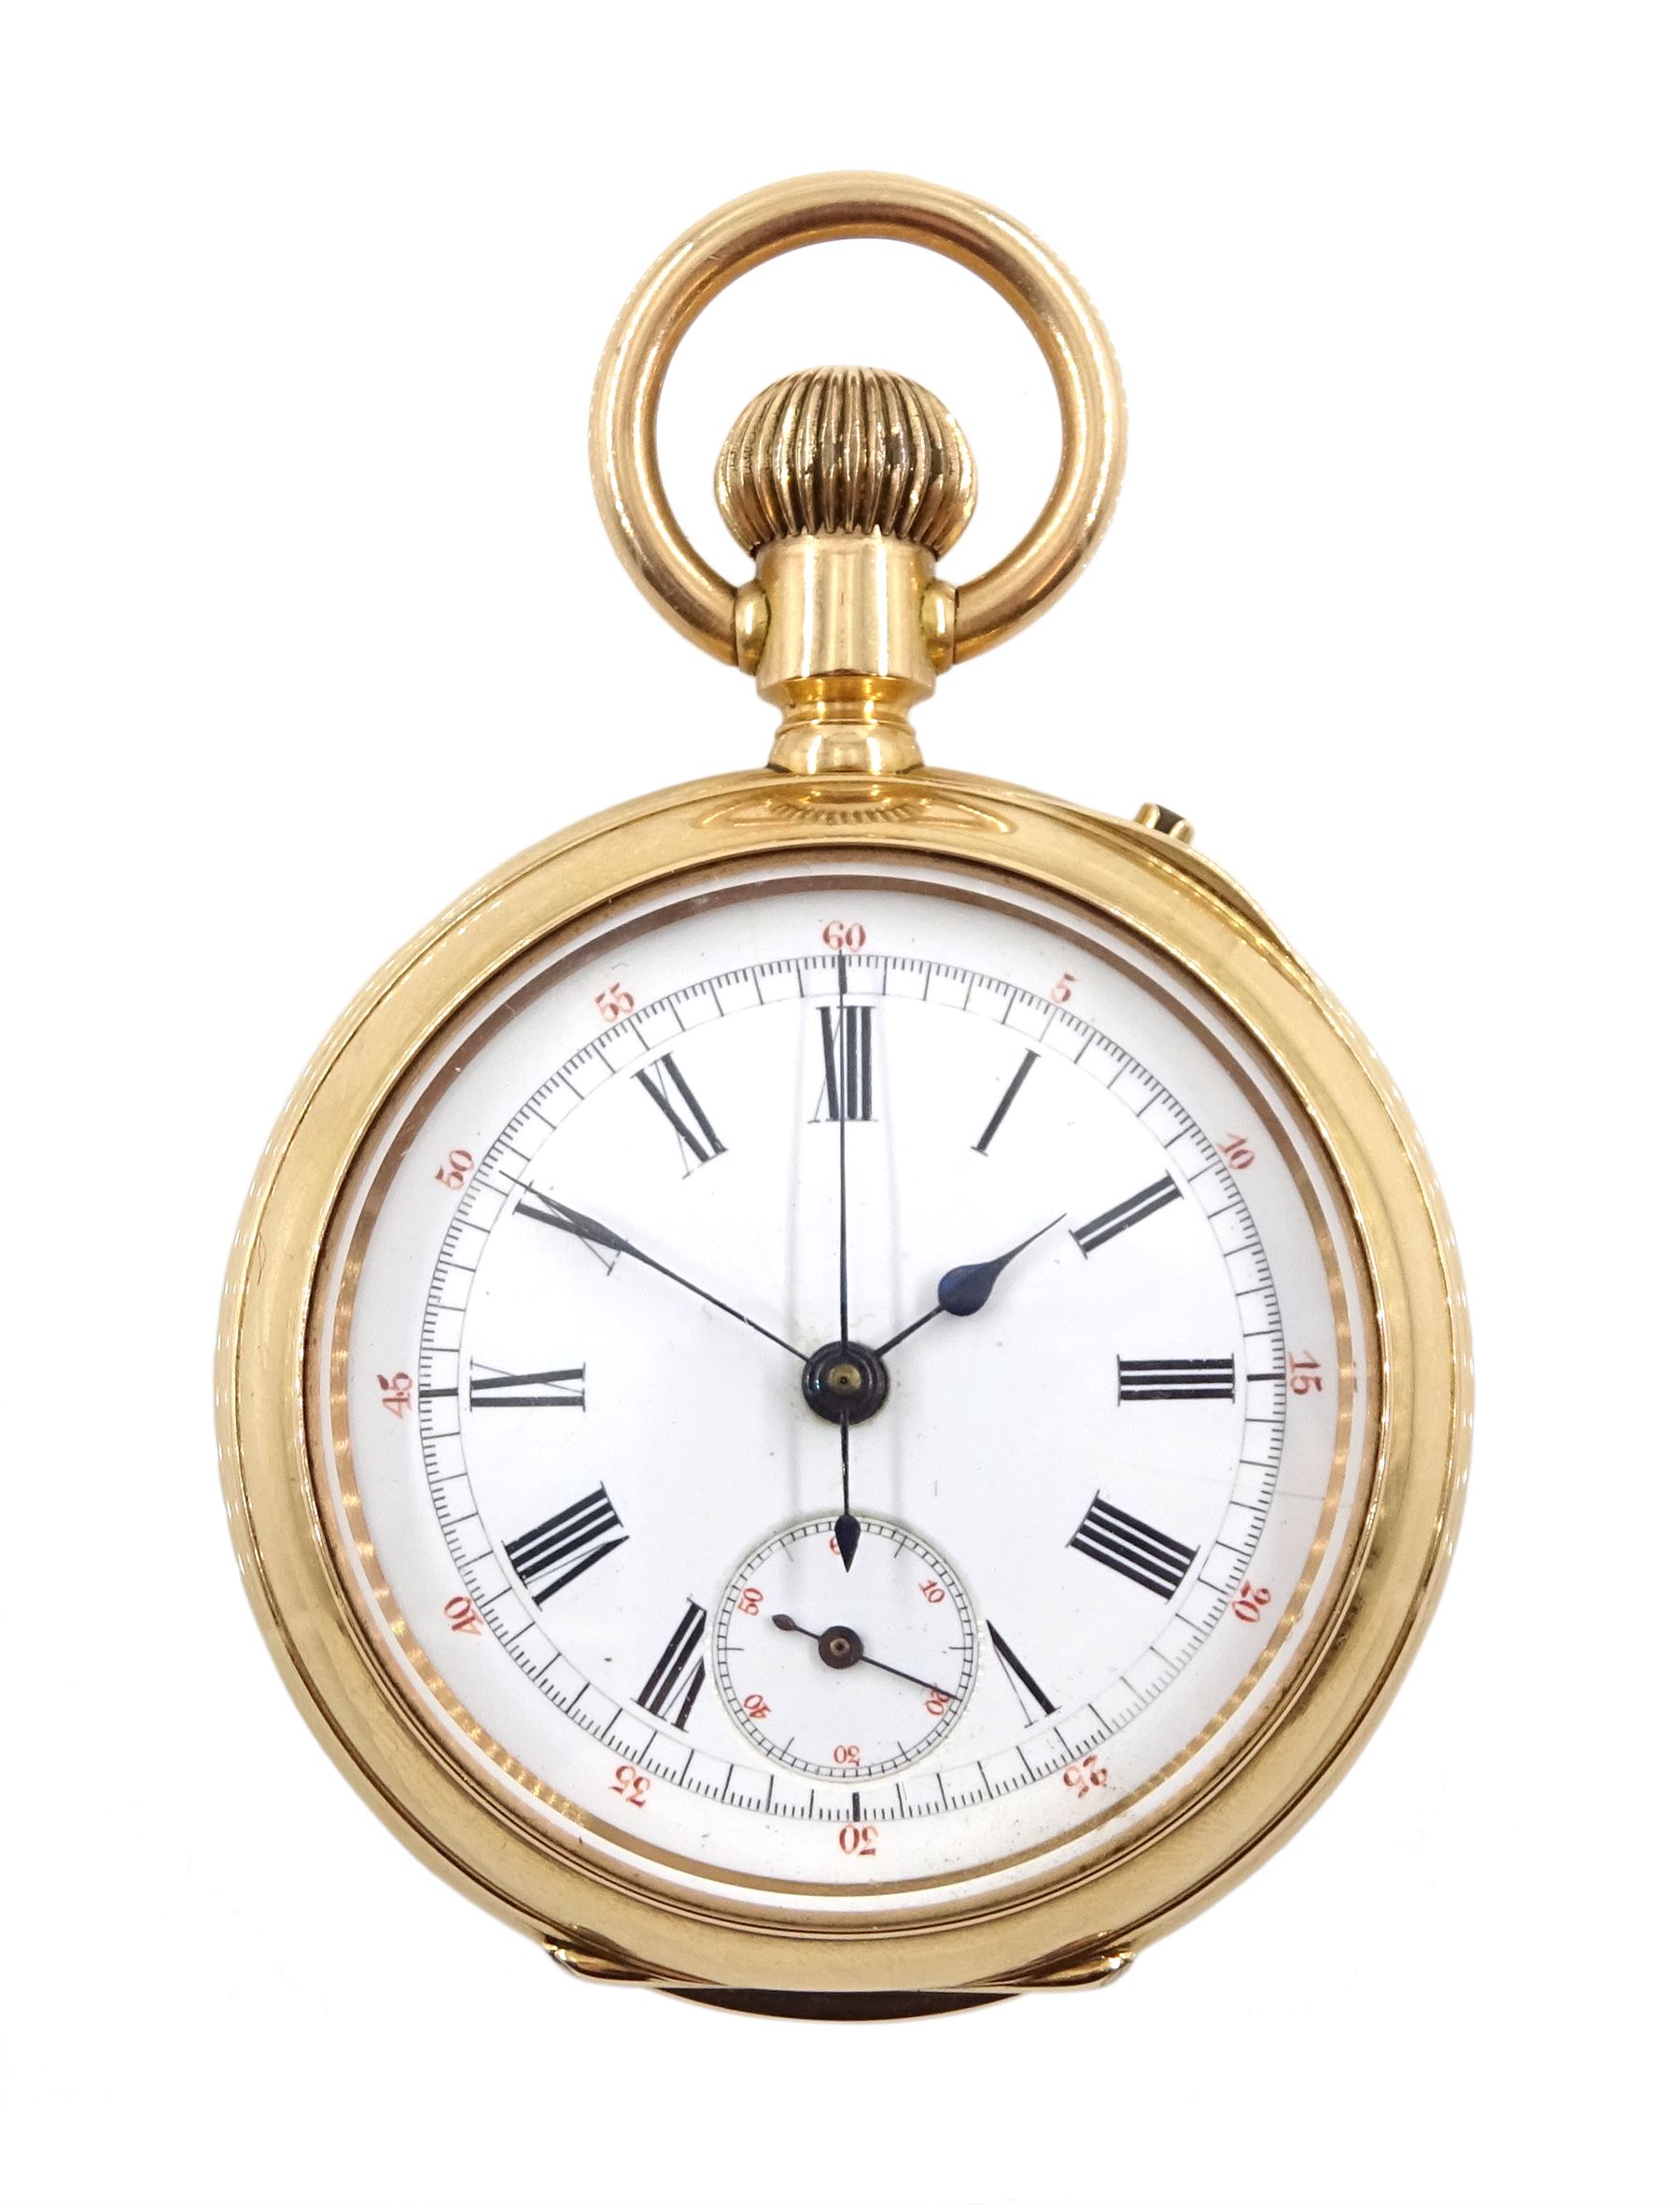 Swiss 18ct gold open face keyless lever chronograph pocket watch, case No. 7967, skeleton dust cover